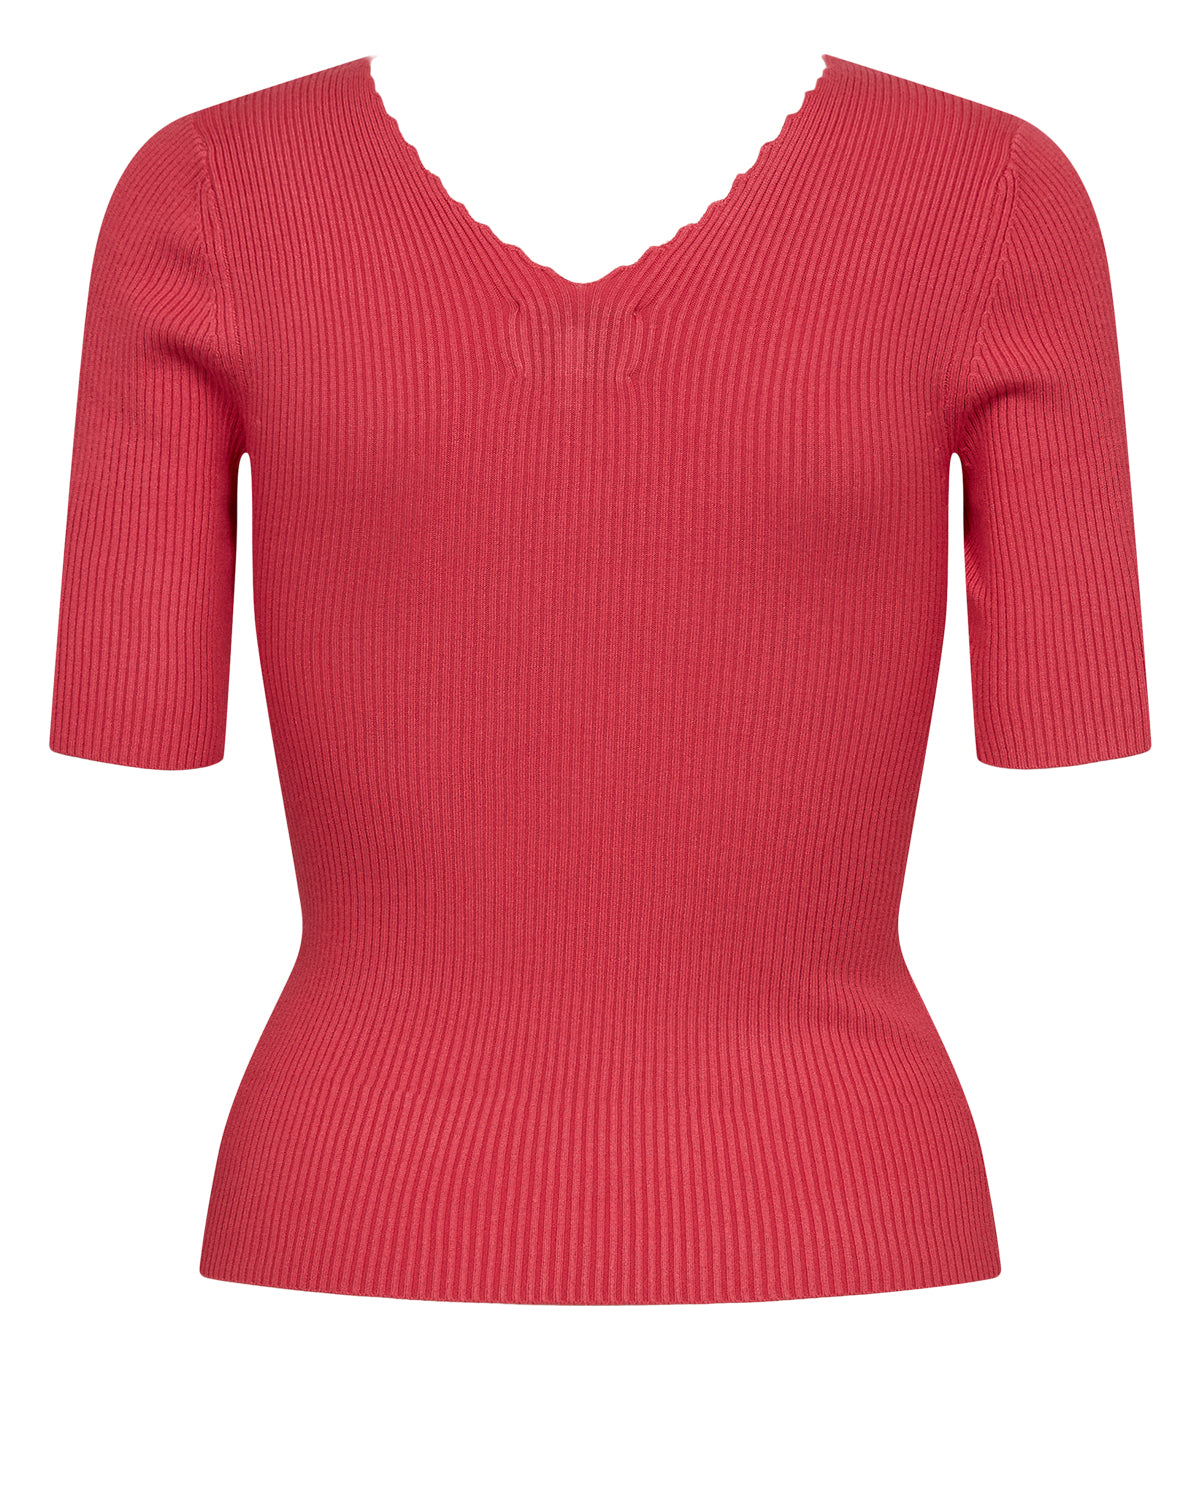 Nuayelet Pullover - Teaberry